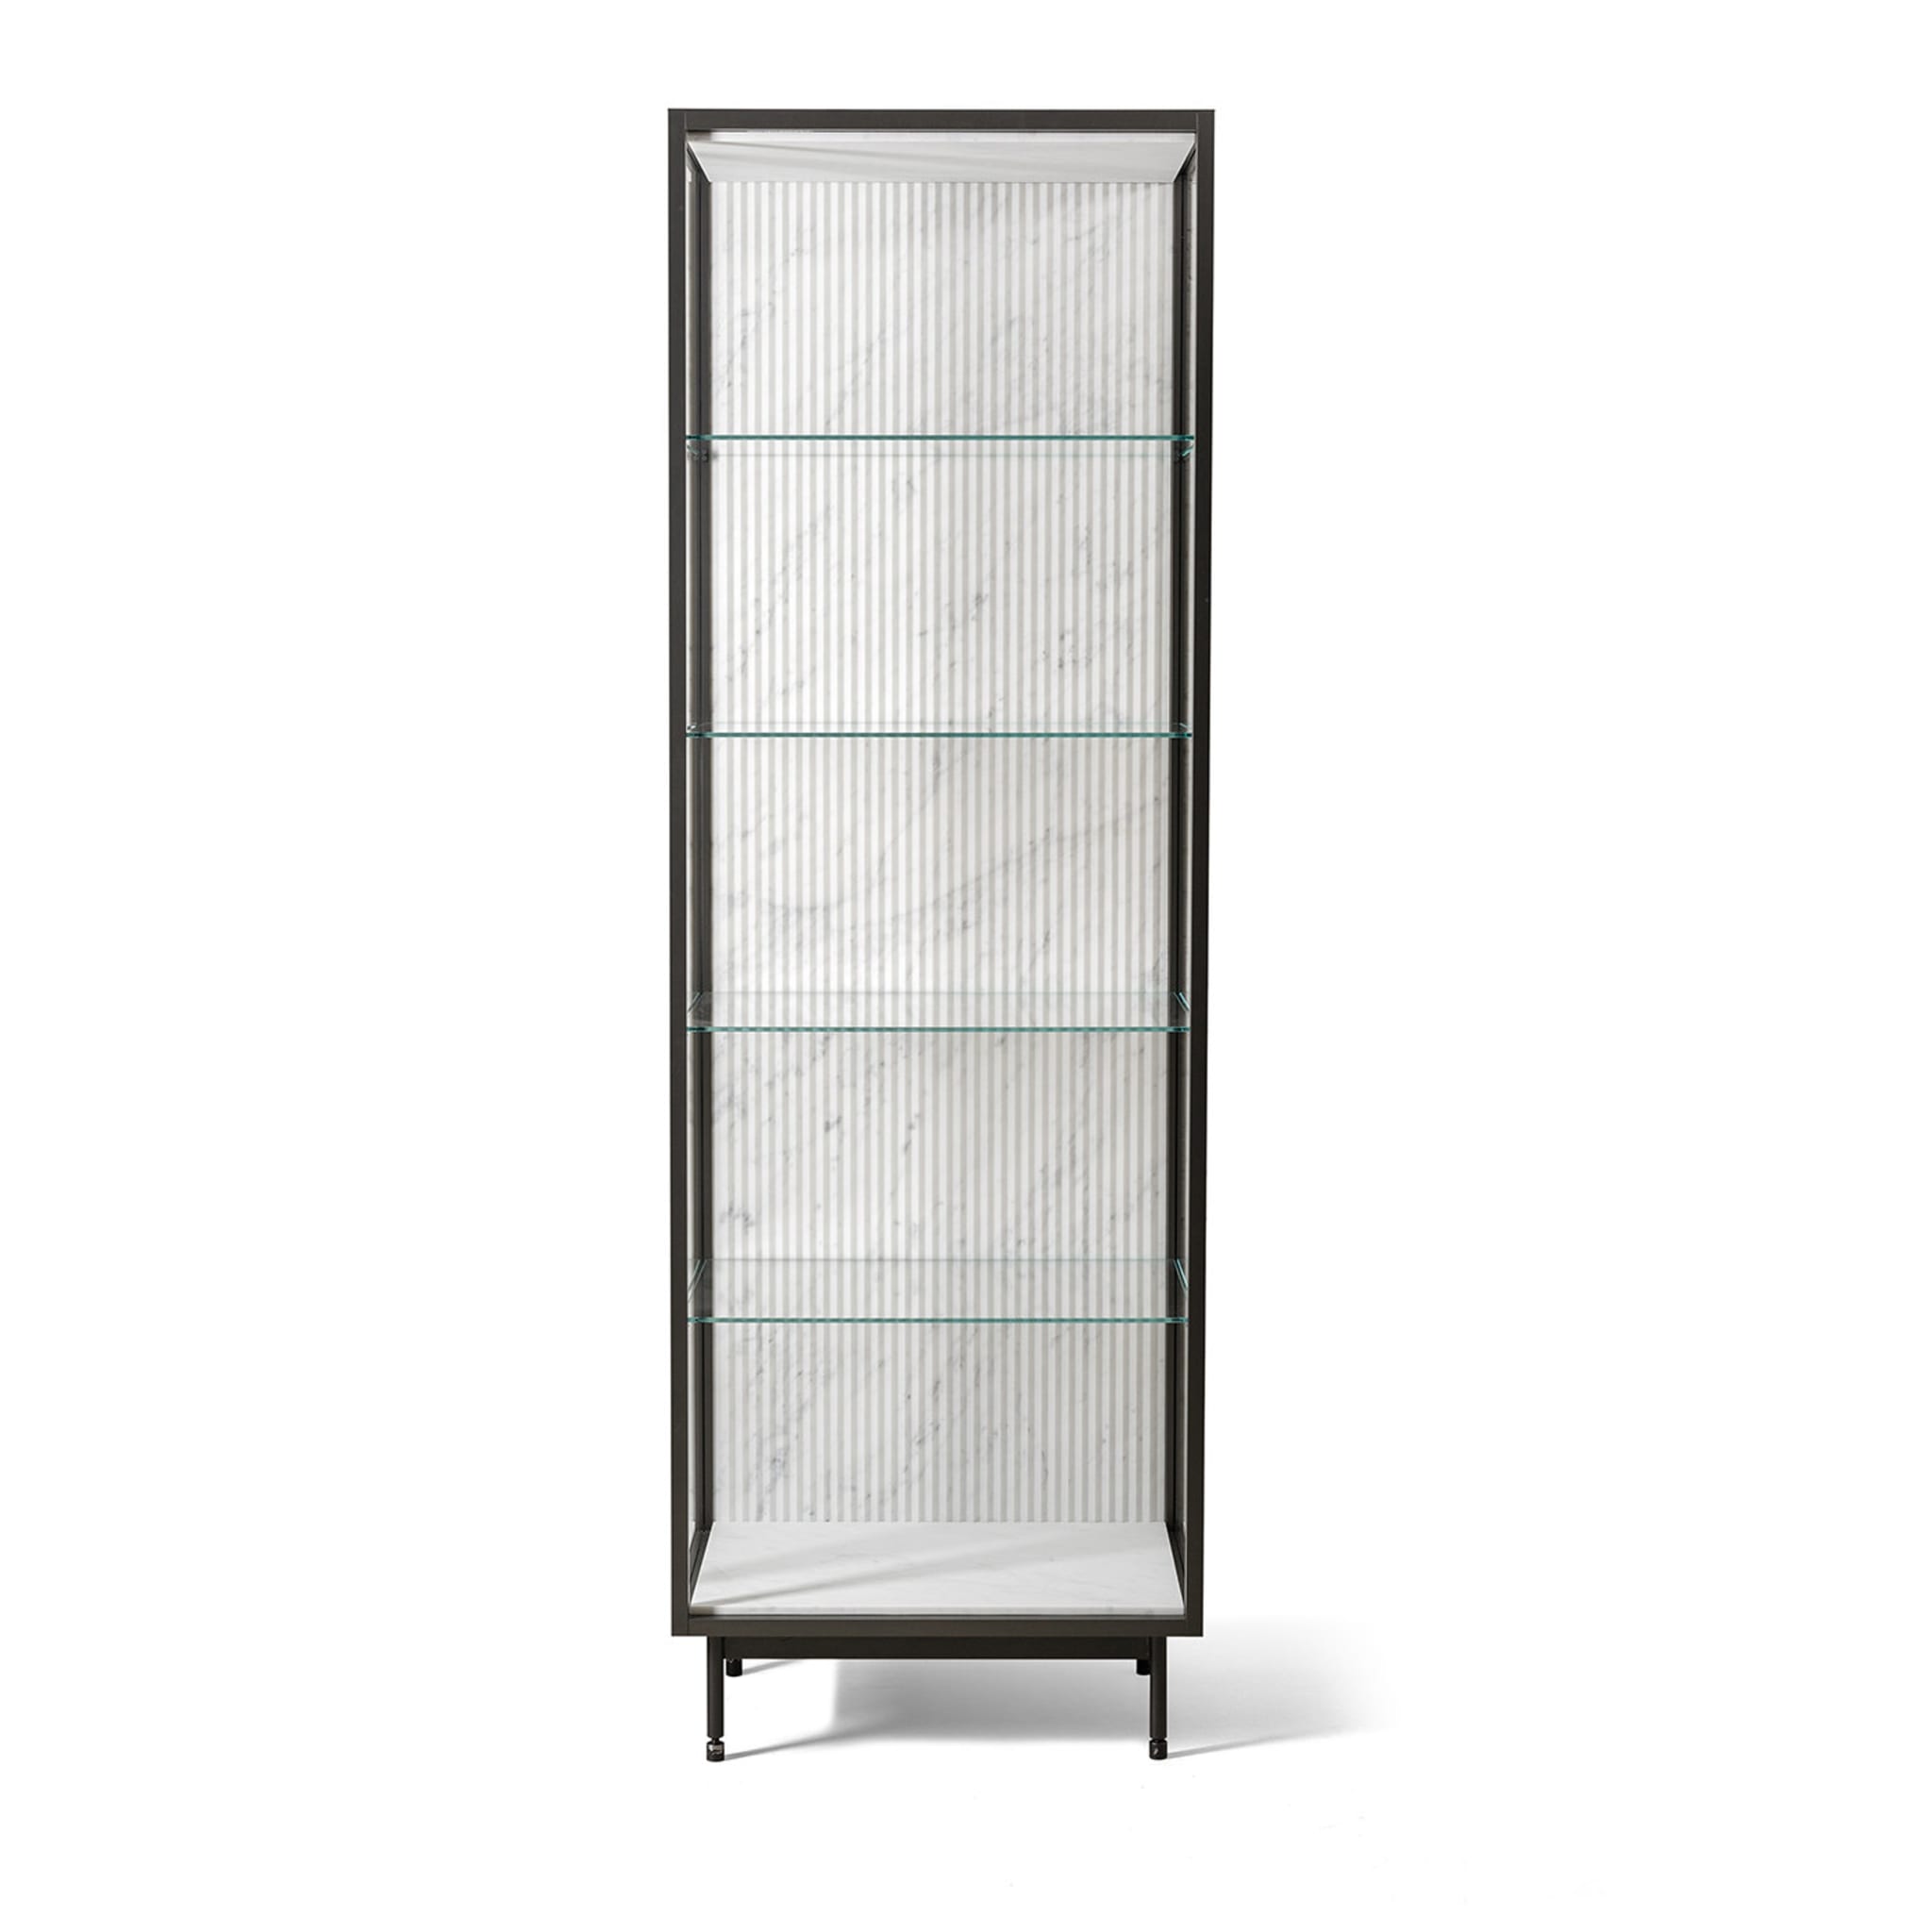 Theca Display Cabinet - Alternative view 1